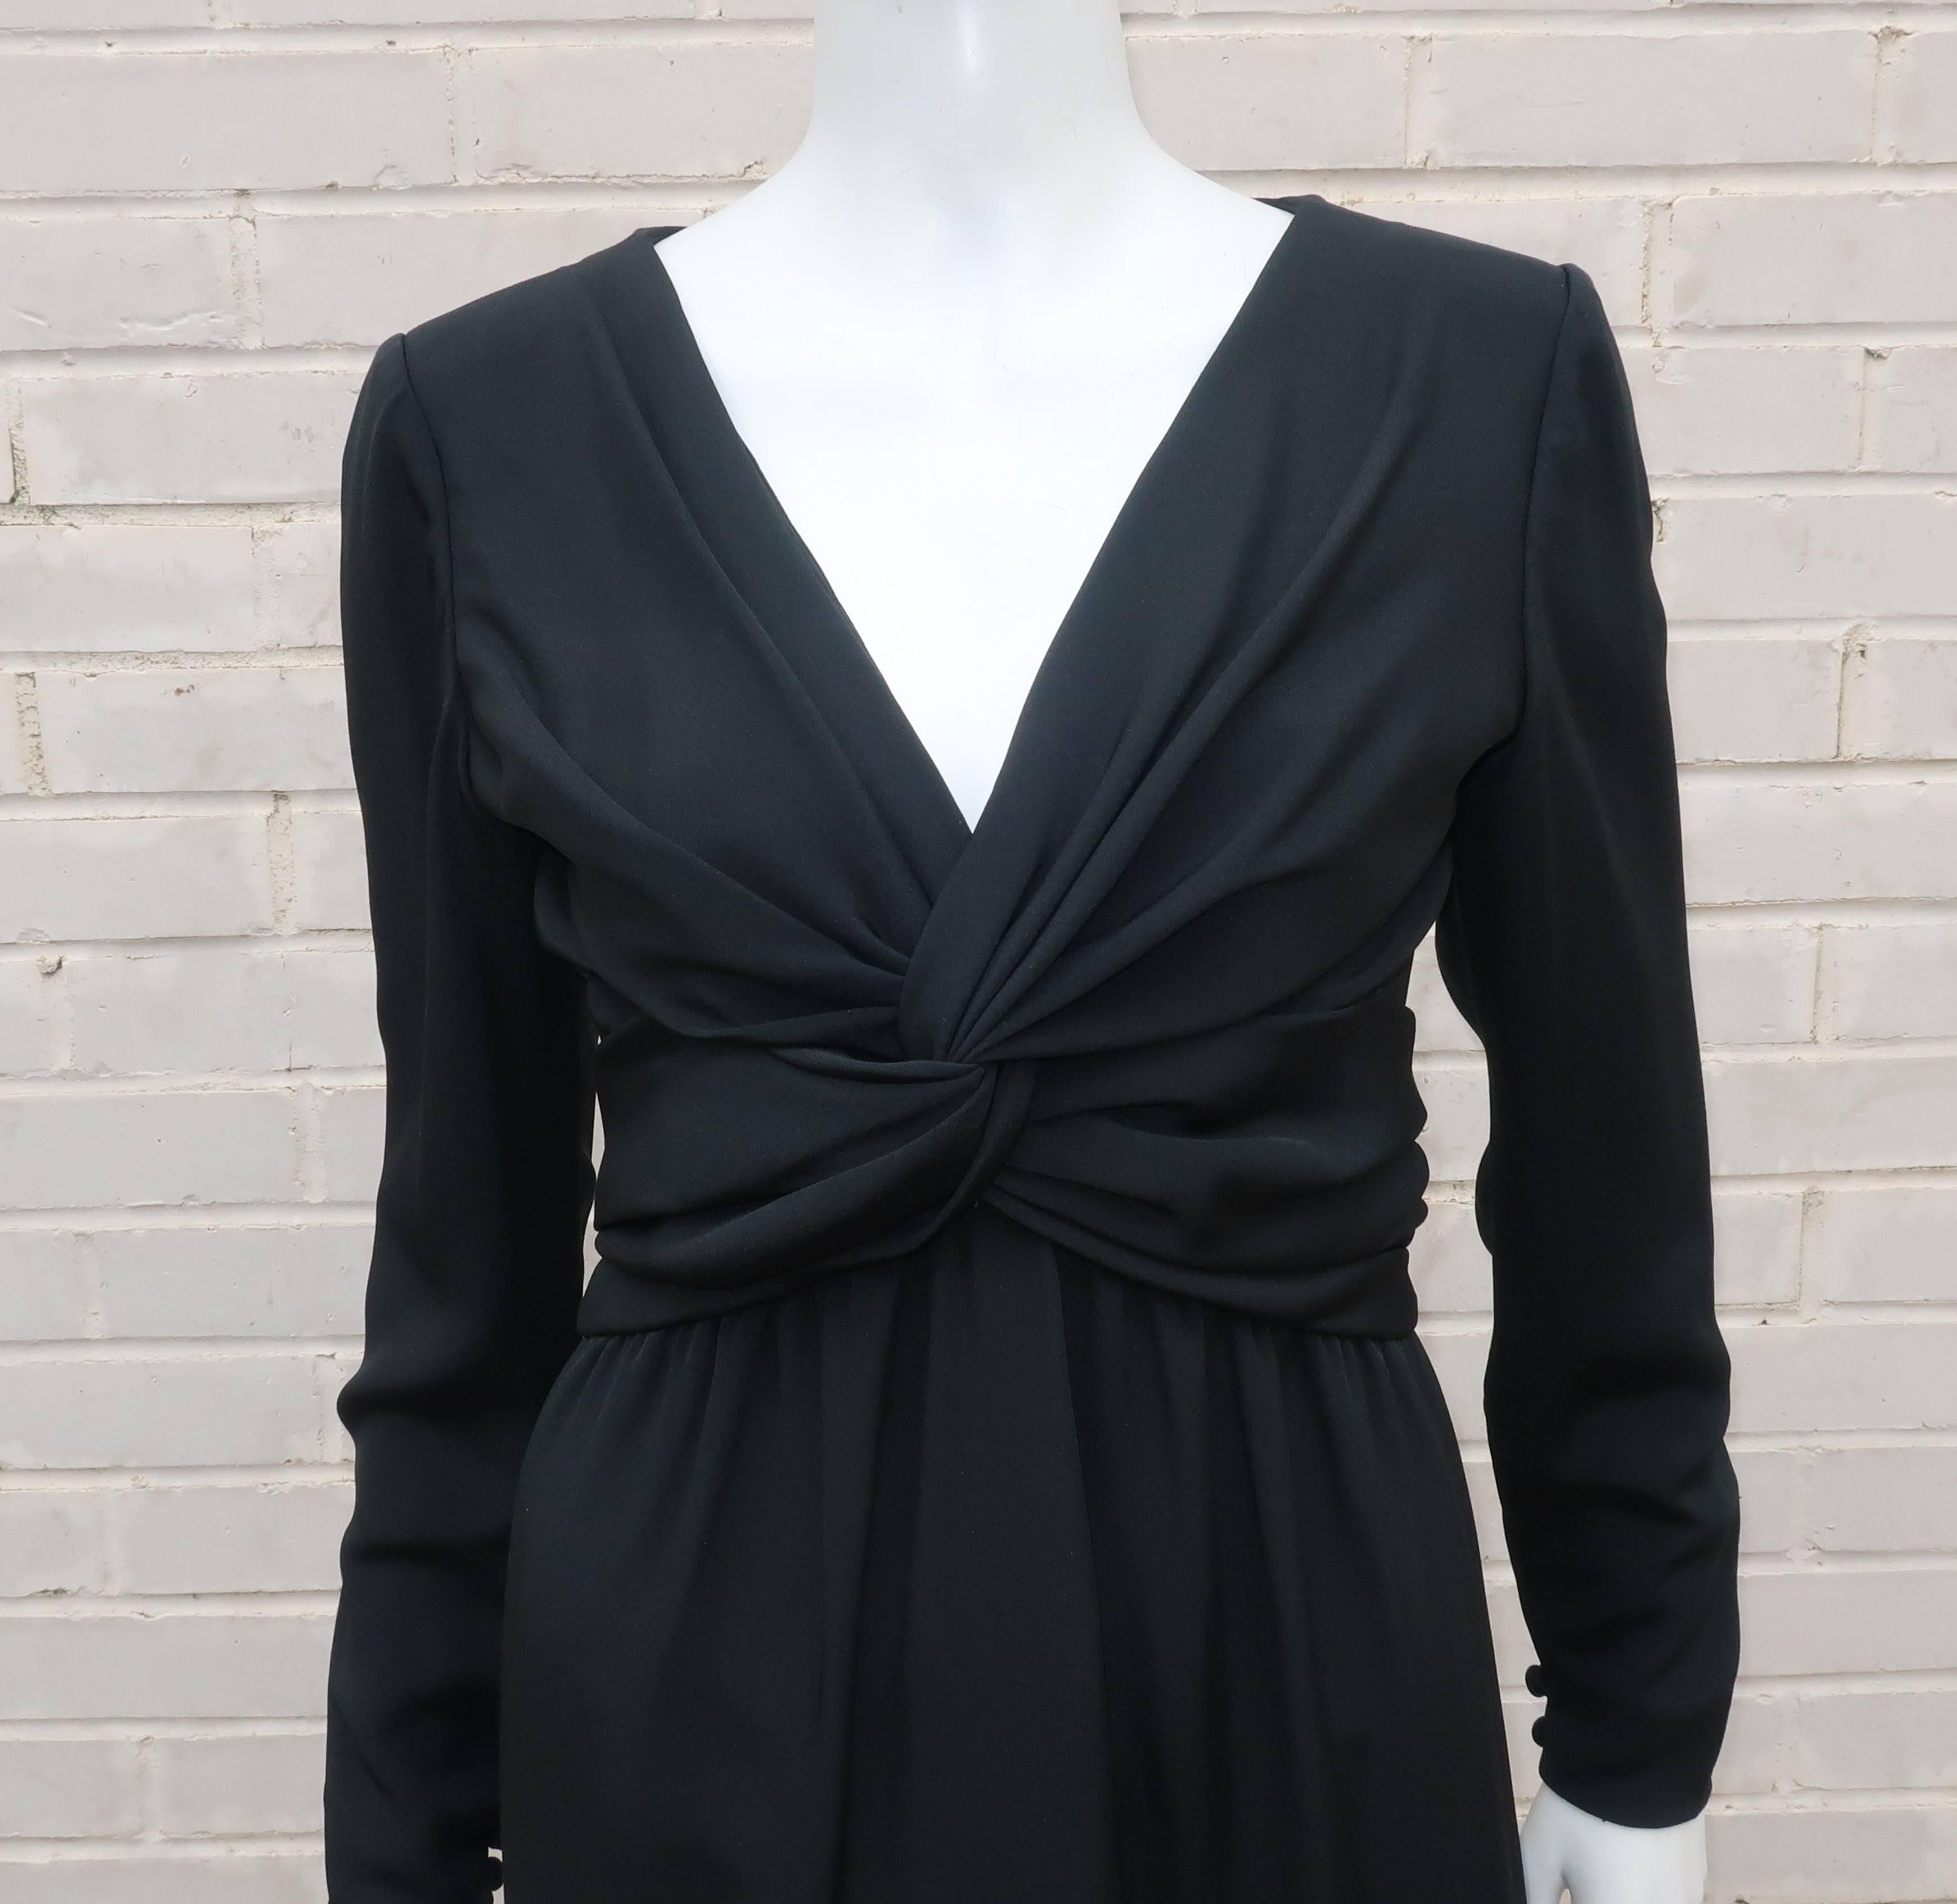 Bill Blass puts a sophisticated twist on the ‘little black dress’.  This sleek design is fabricated from a fine silk faille with a ruched detail at the bodice that criss crosses to create a fashionable twisted knot at the bust.  It zips and hooks at